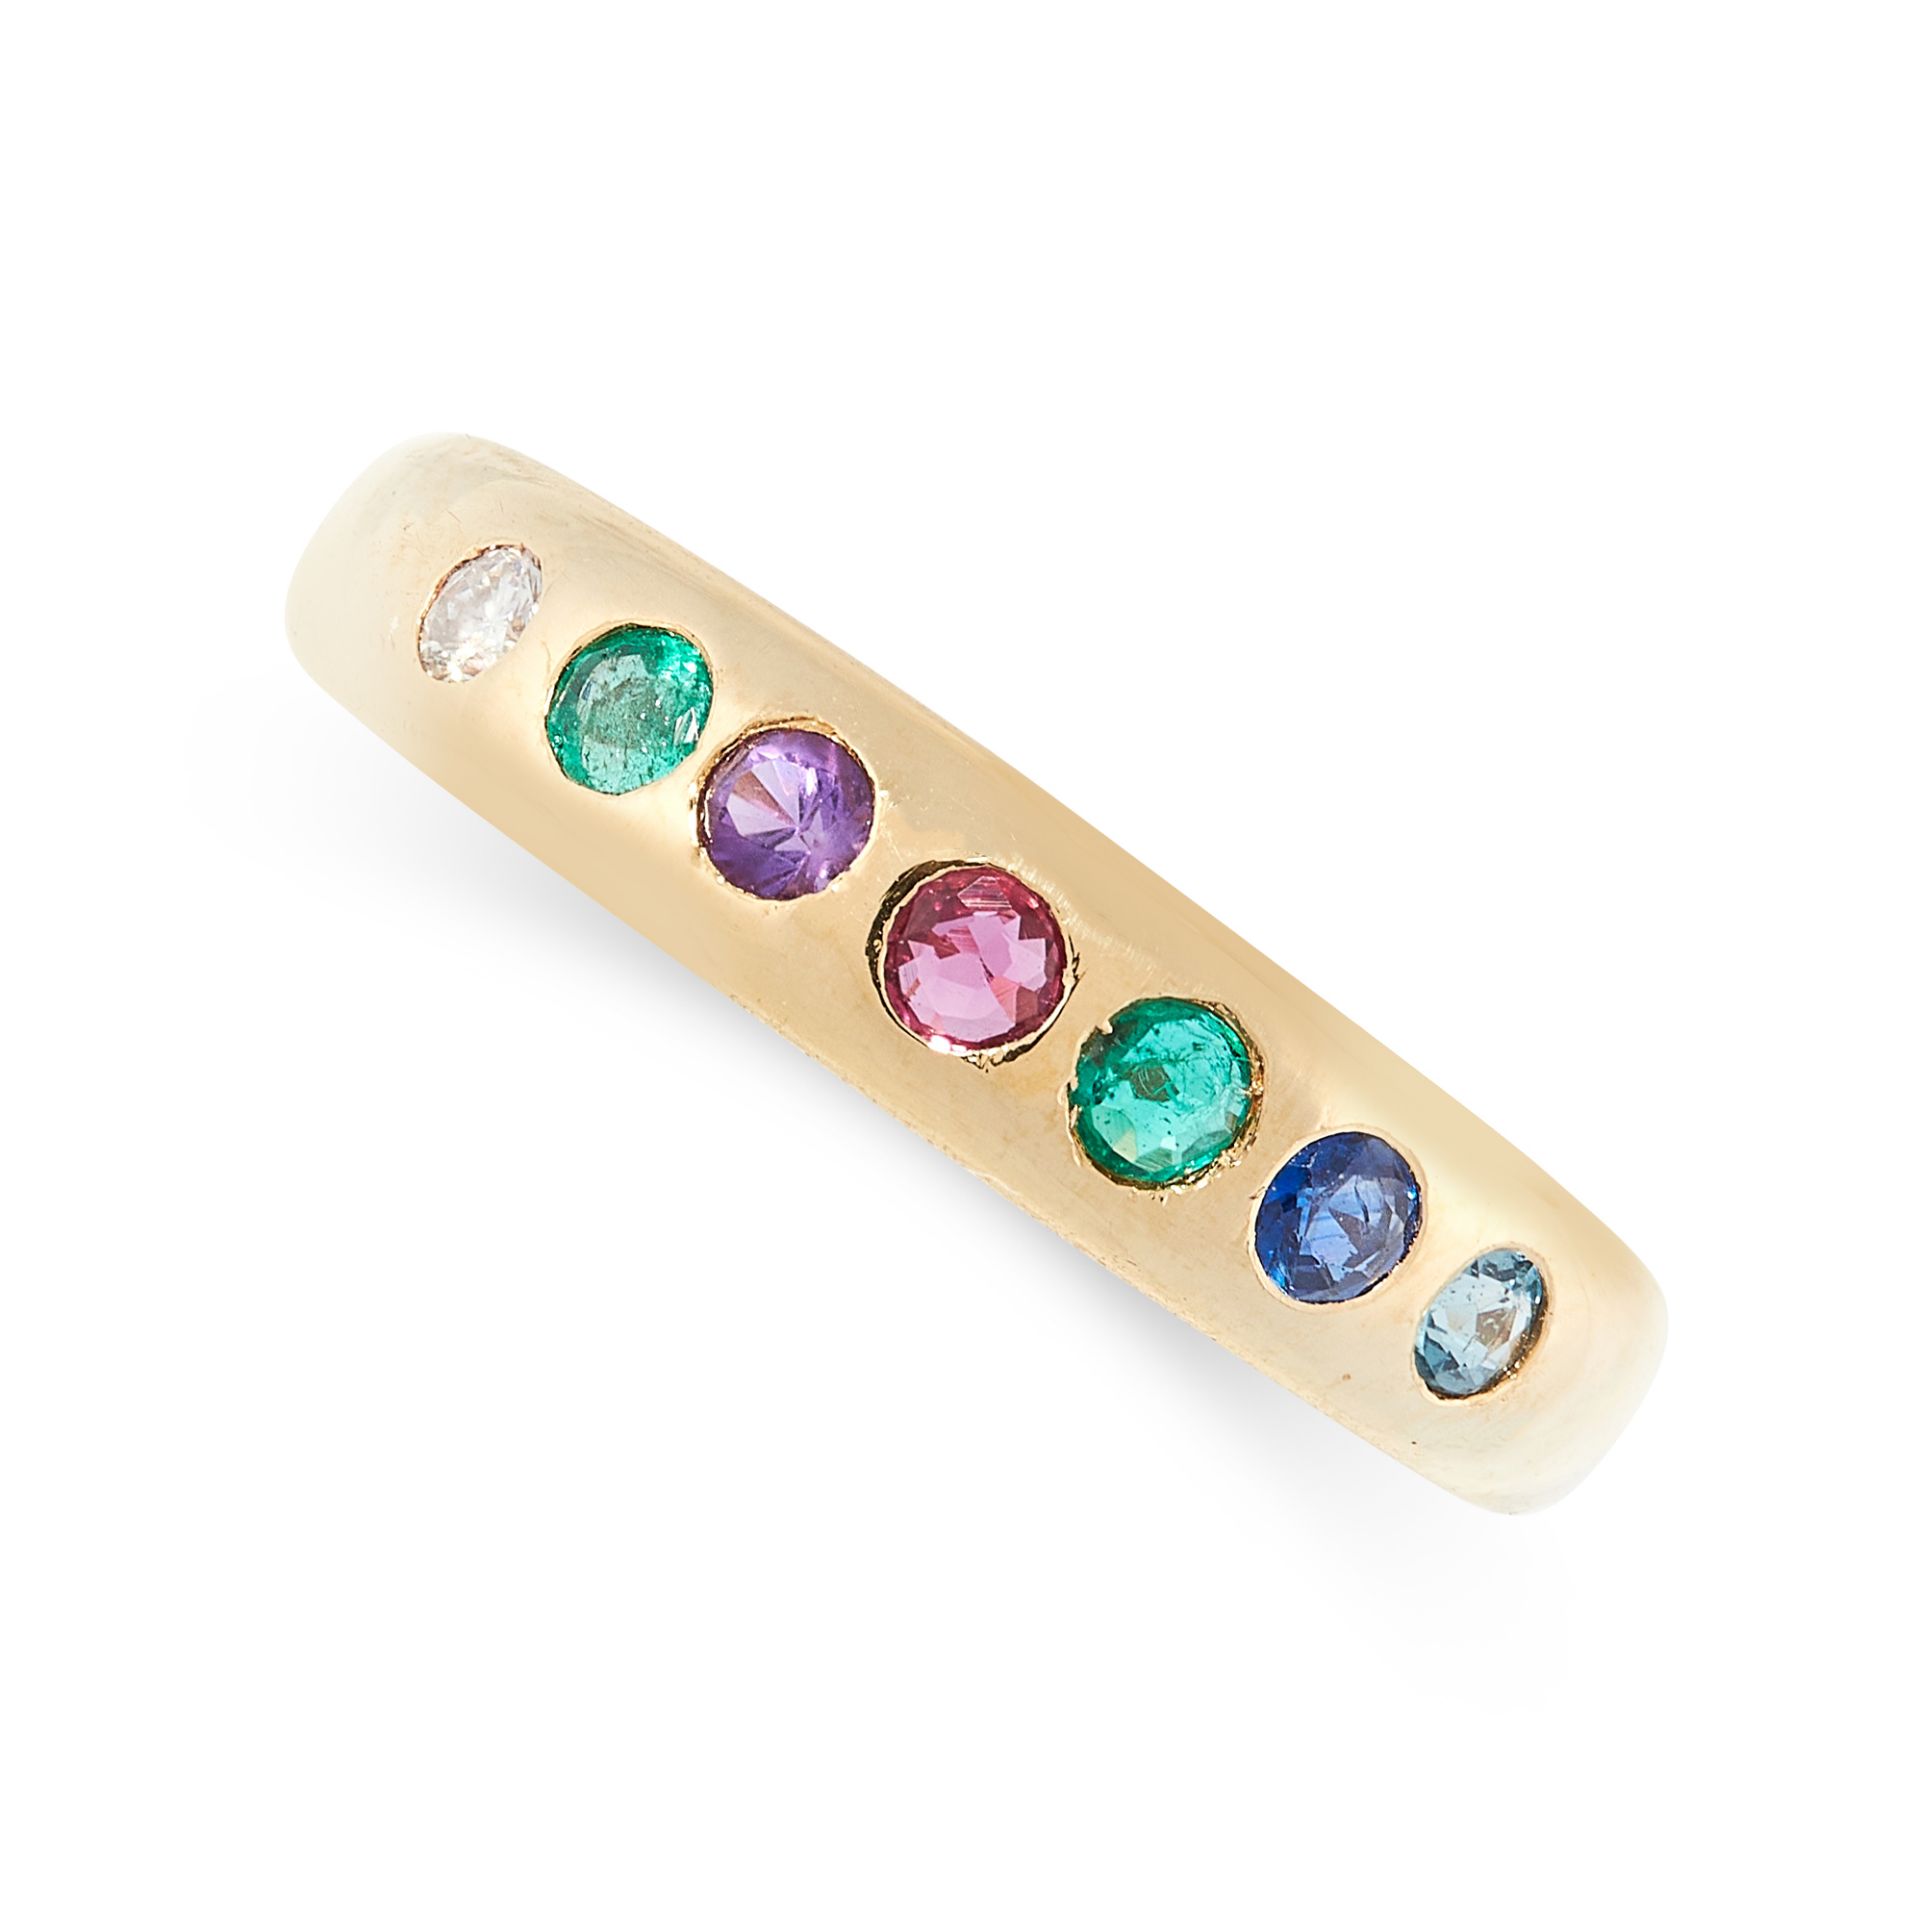 A GEMSET DEAREST RING in 18ct yellow gold, set with a row of round cut diamond, emerald, amethyst,